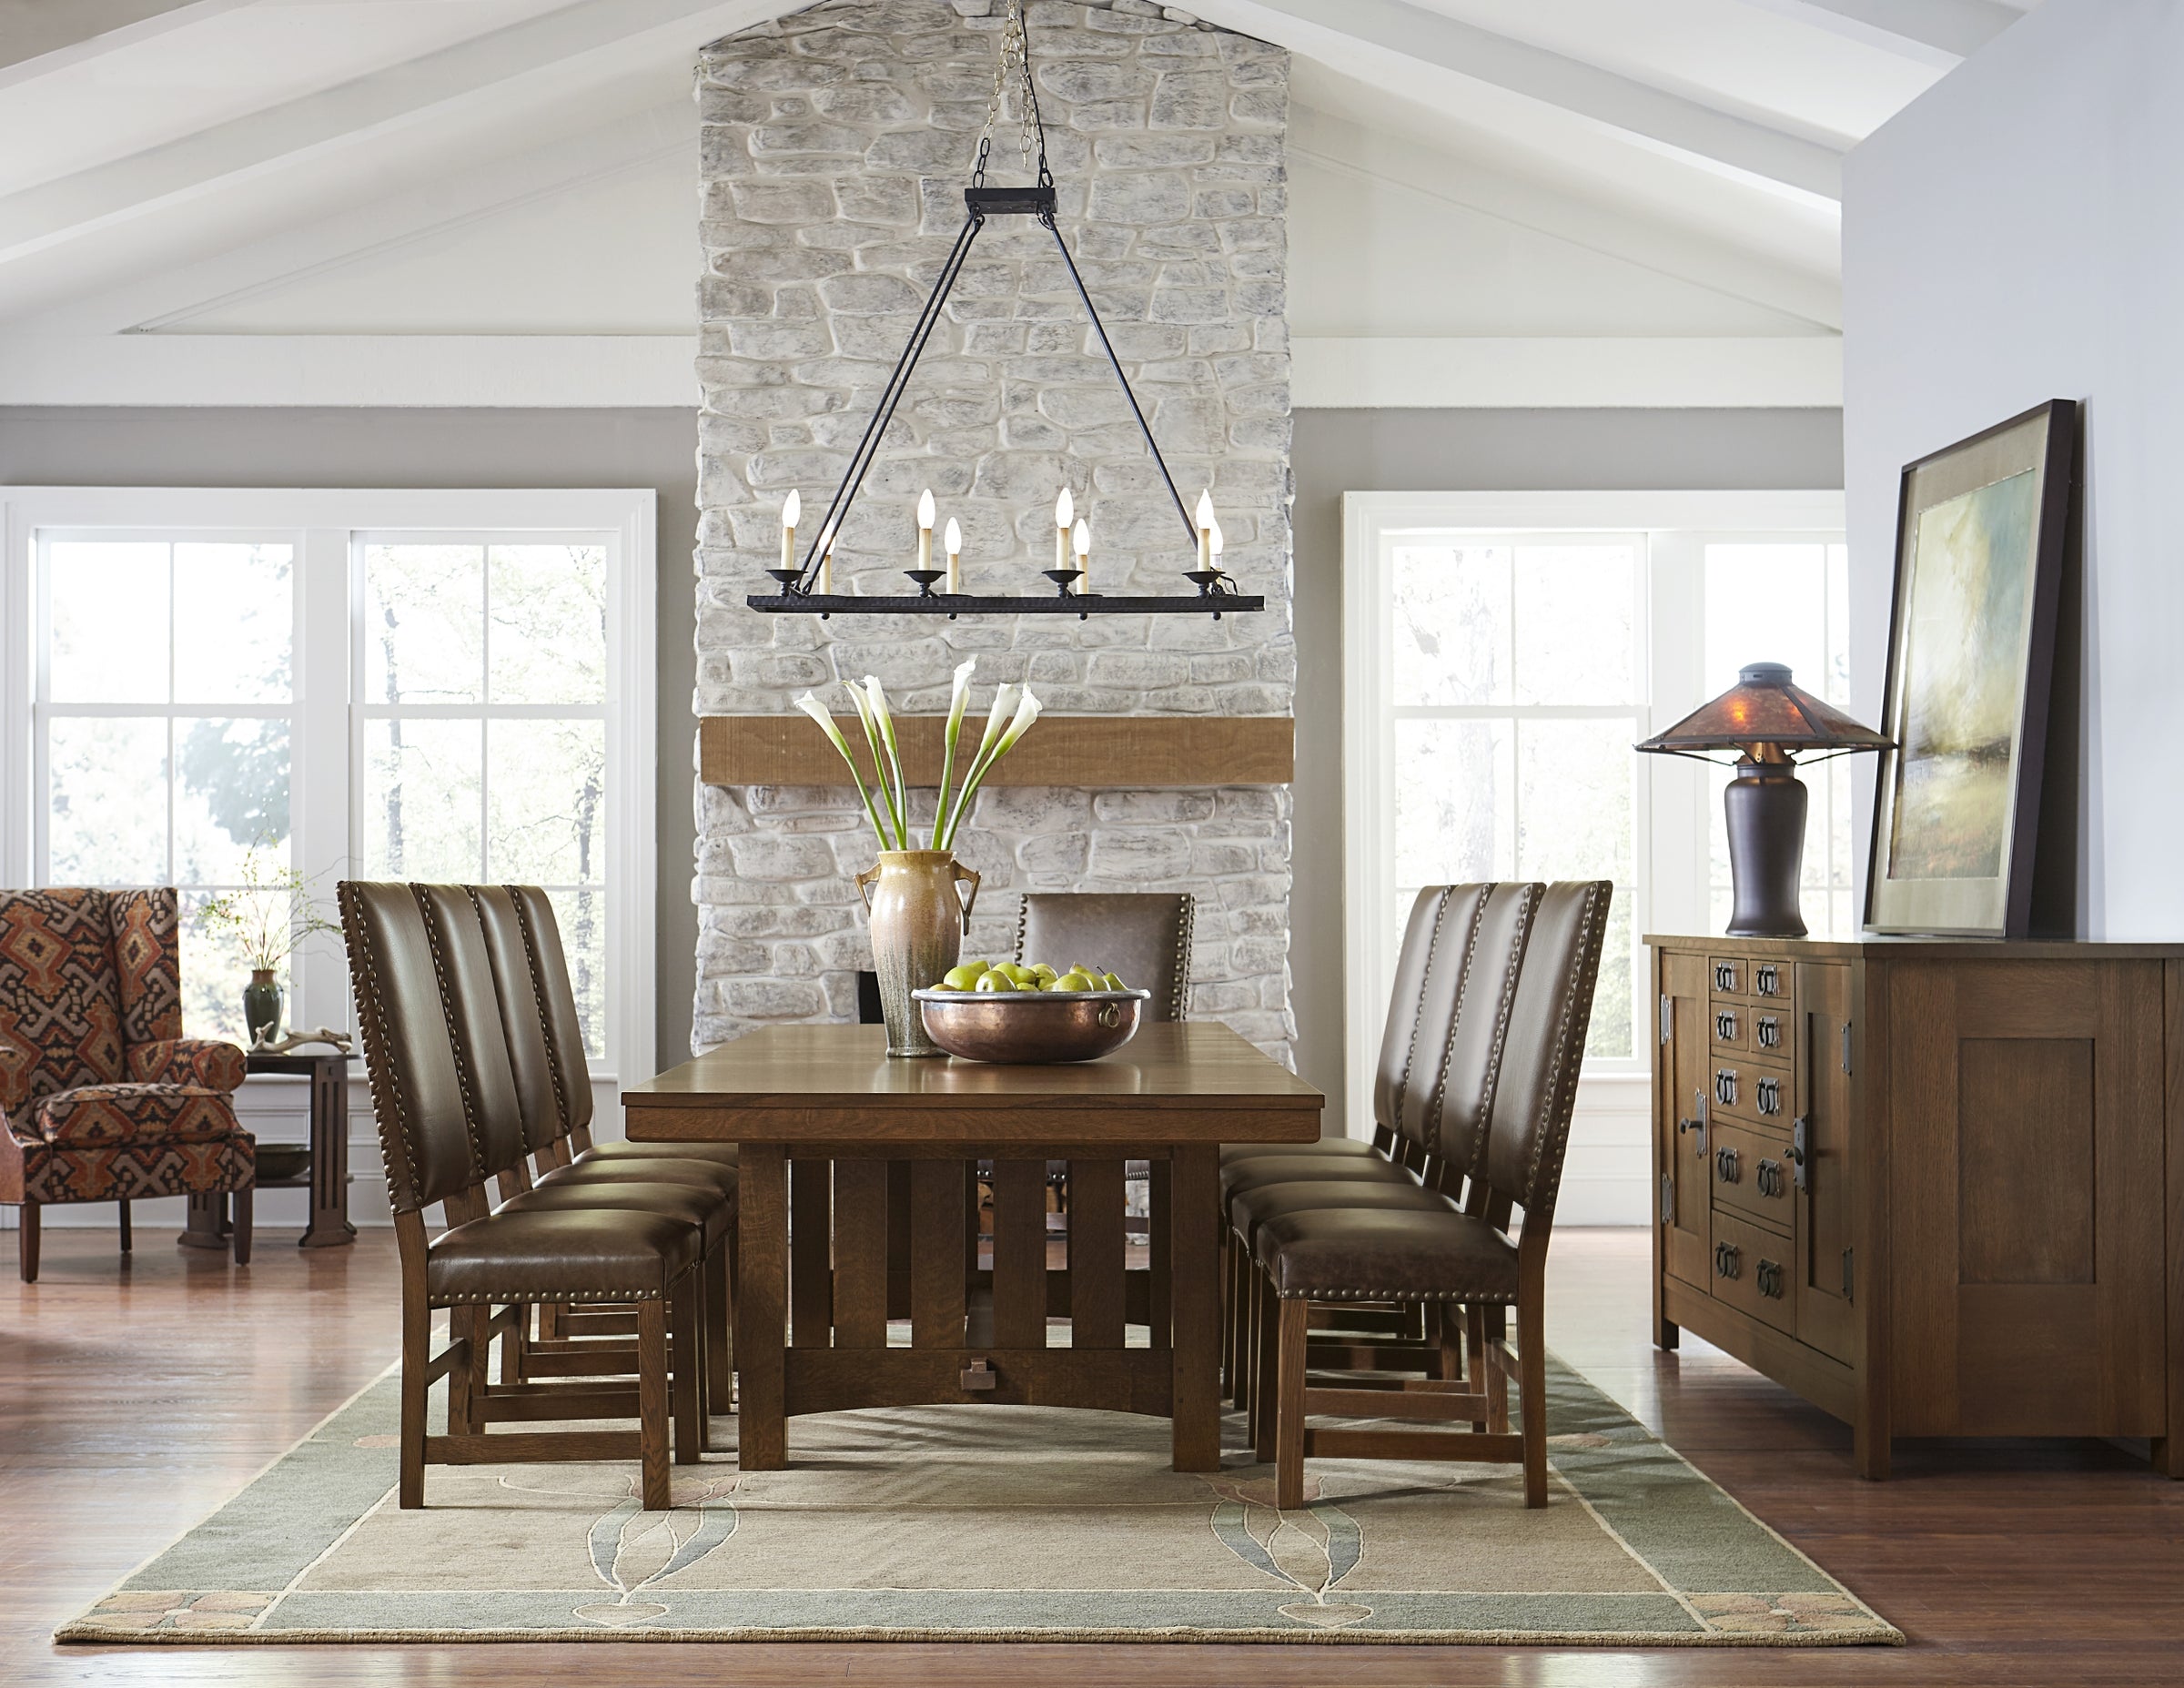 Rustic dining room scene from Stickley featuring a large wood dining table surrounded by leather and wood dining chairs.